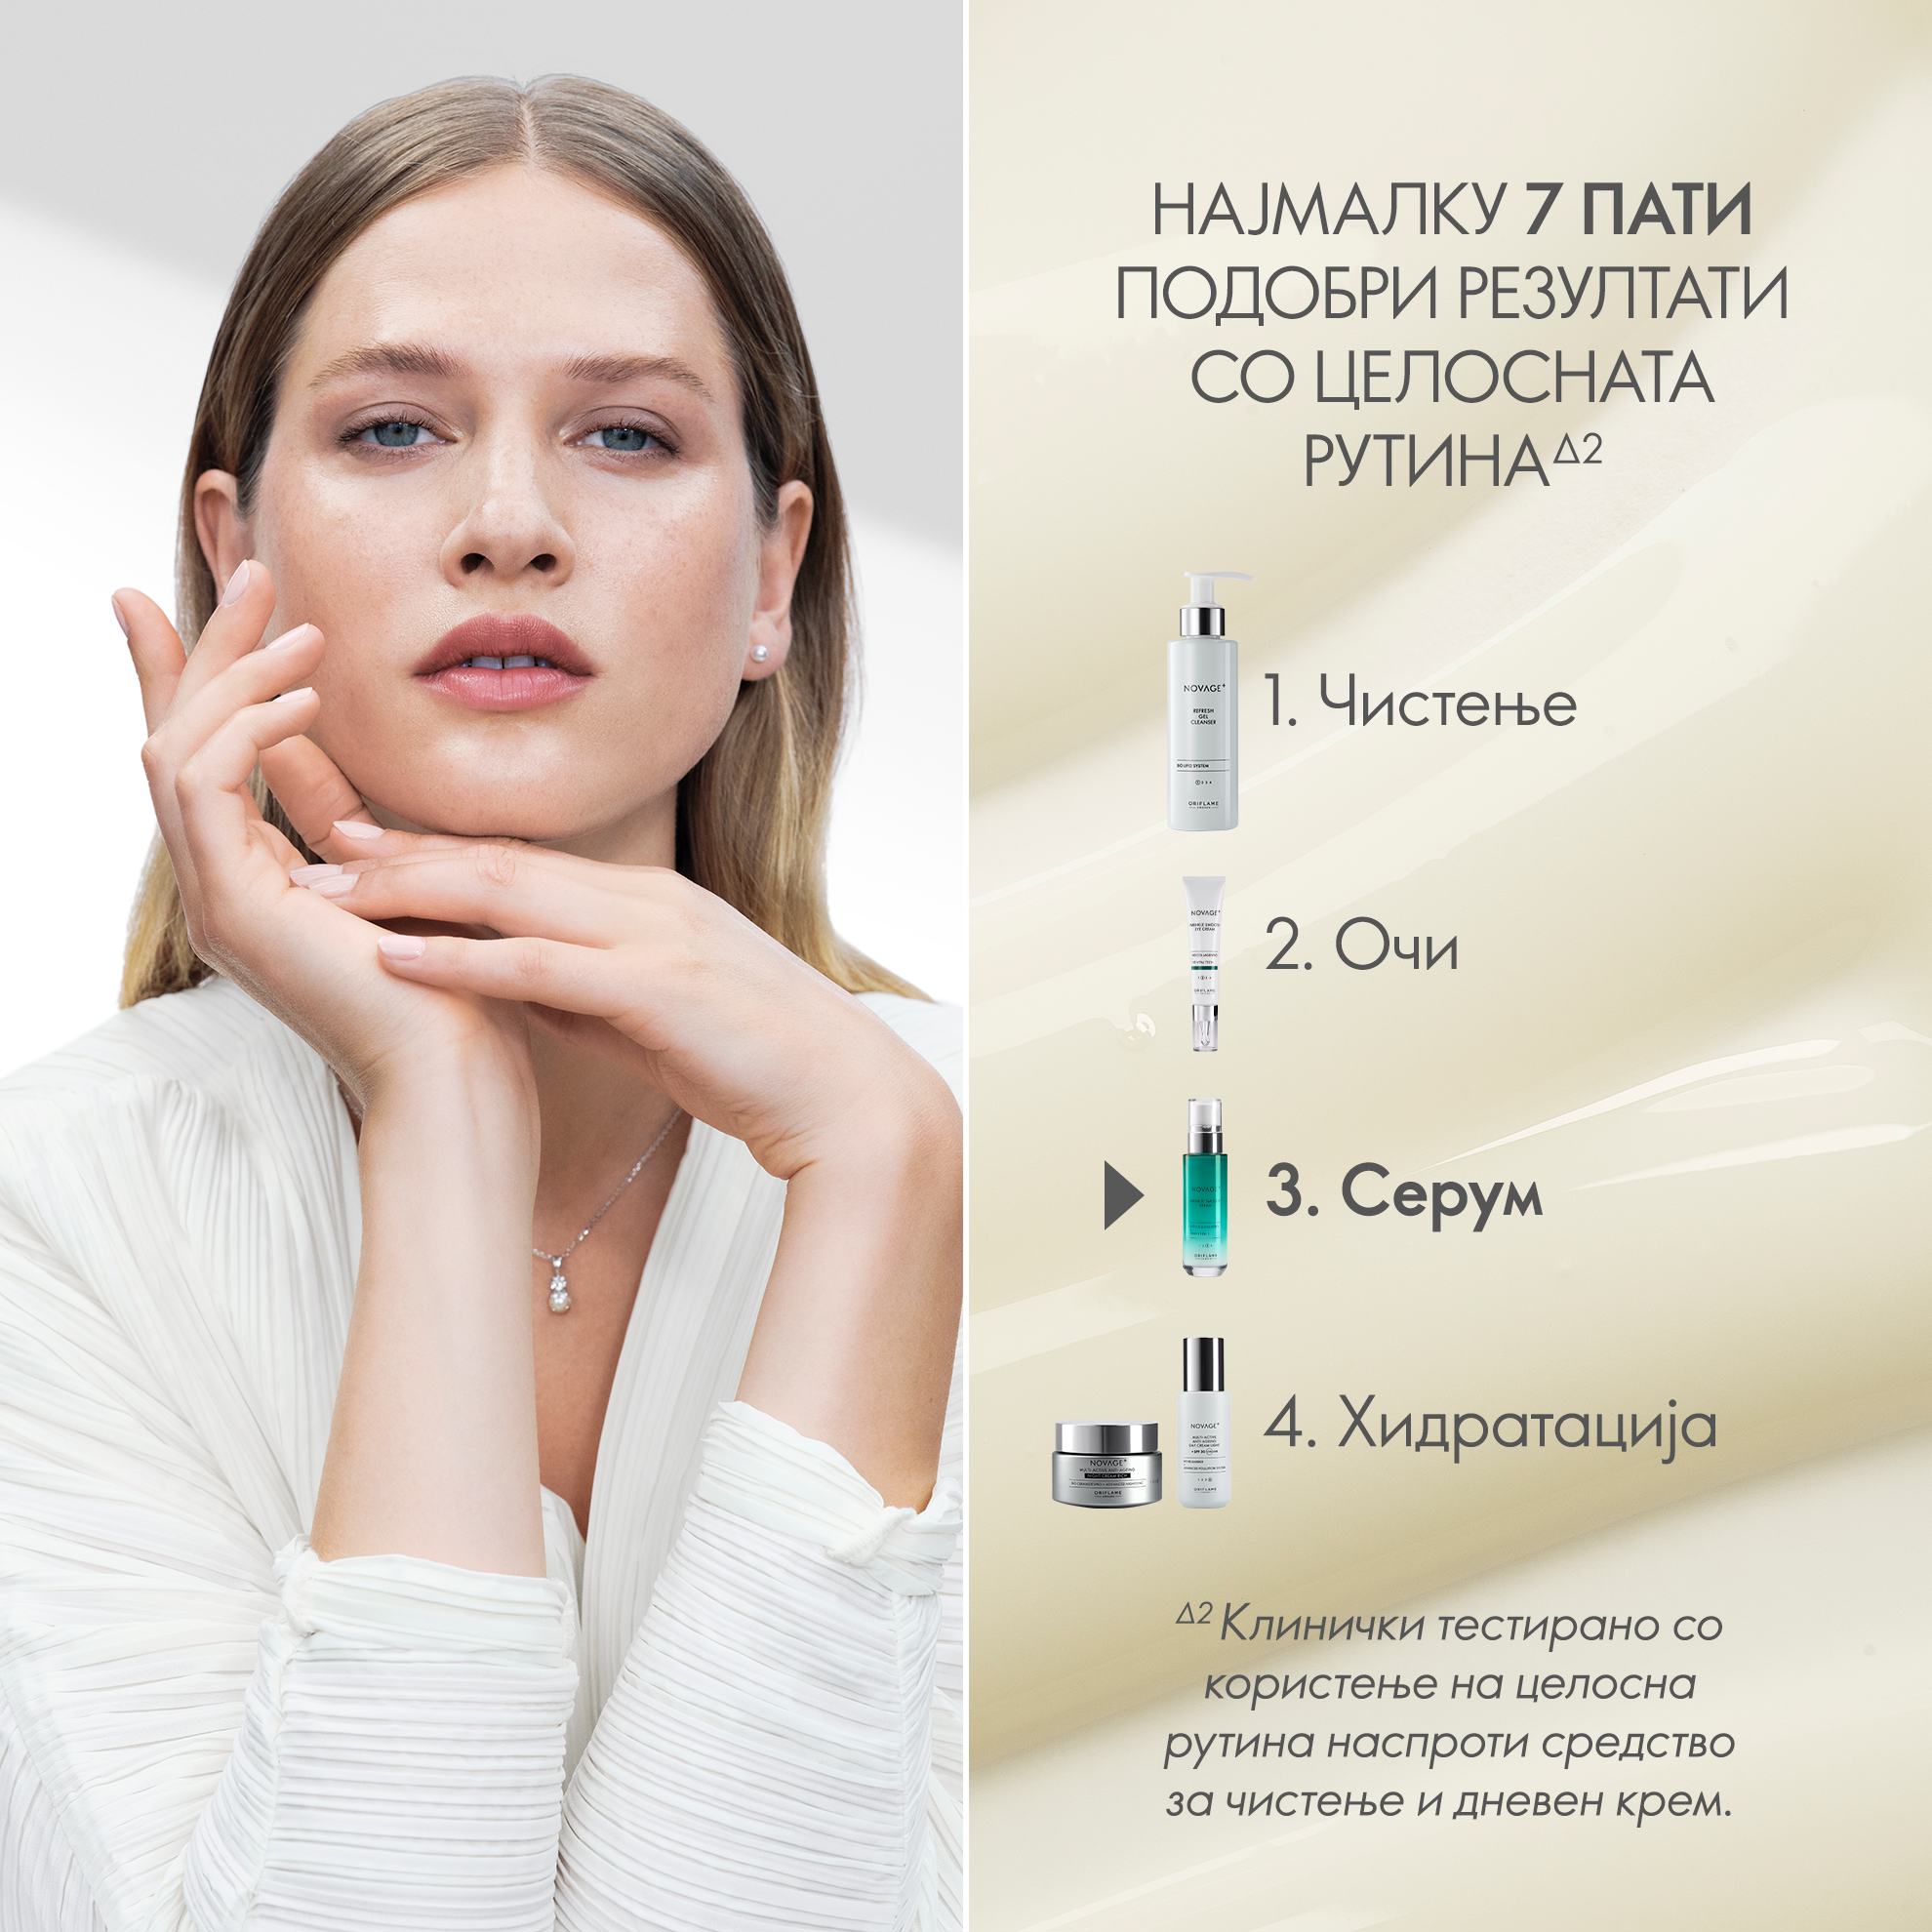 https://media-cdn.oriflame.com/productImage?externalMediaId=product-management-media%2fProducts%2f41035%2fMK%2f41035_5.png&id=17583759&version=2